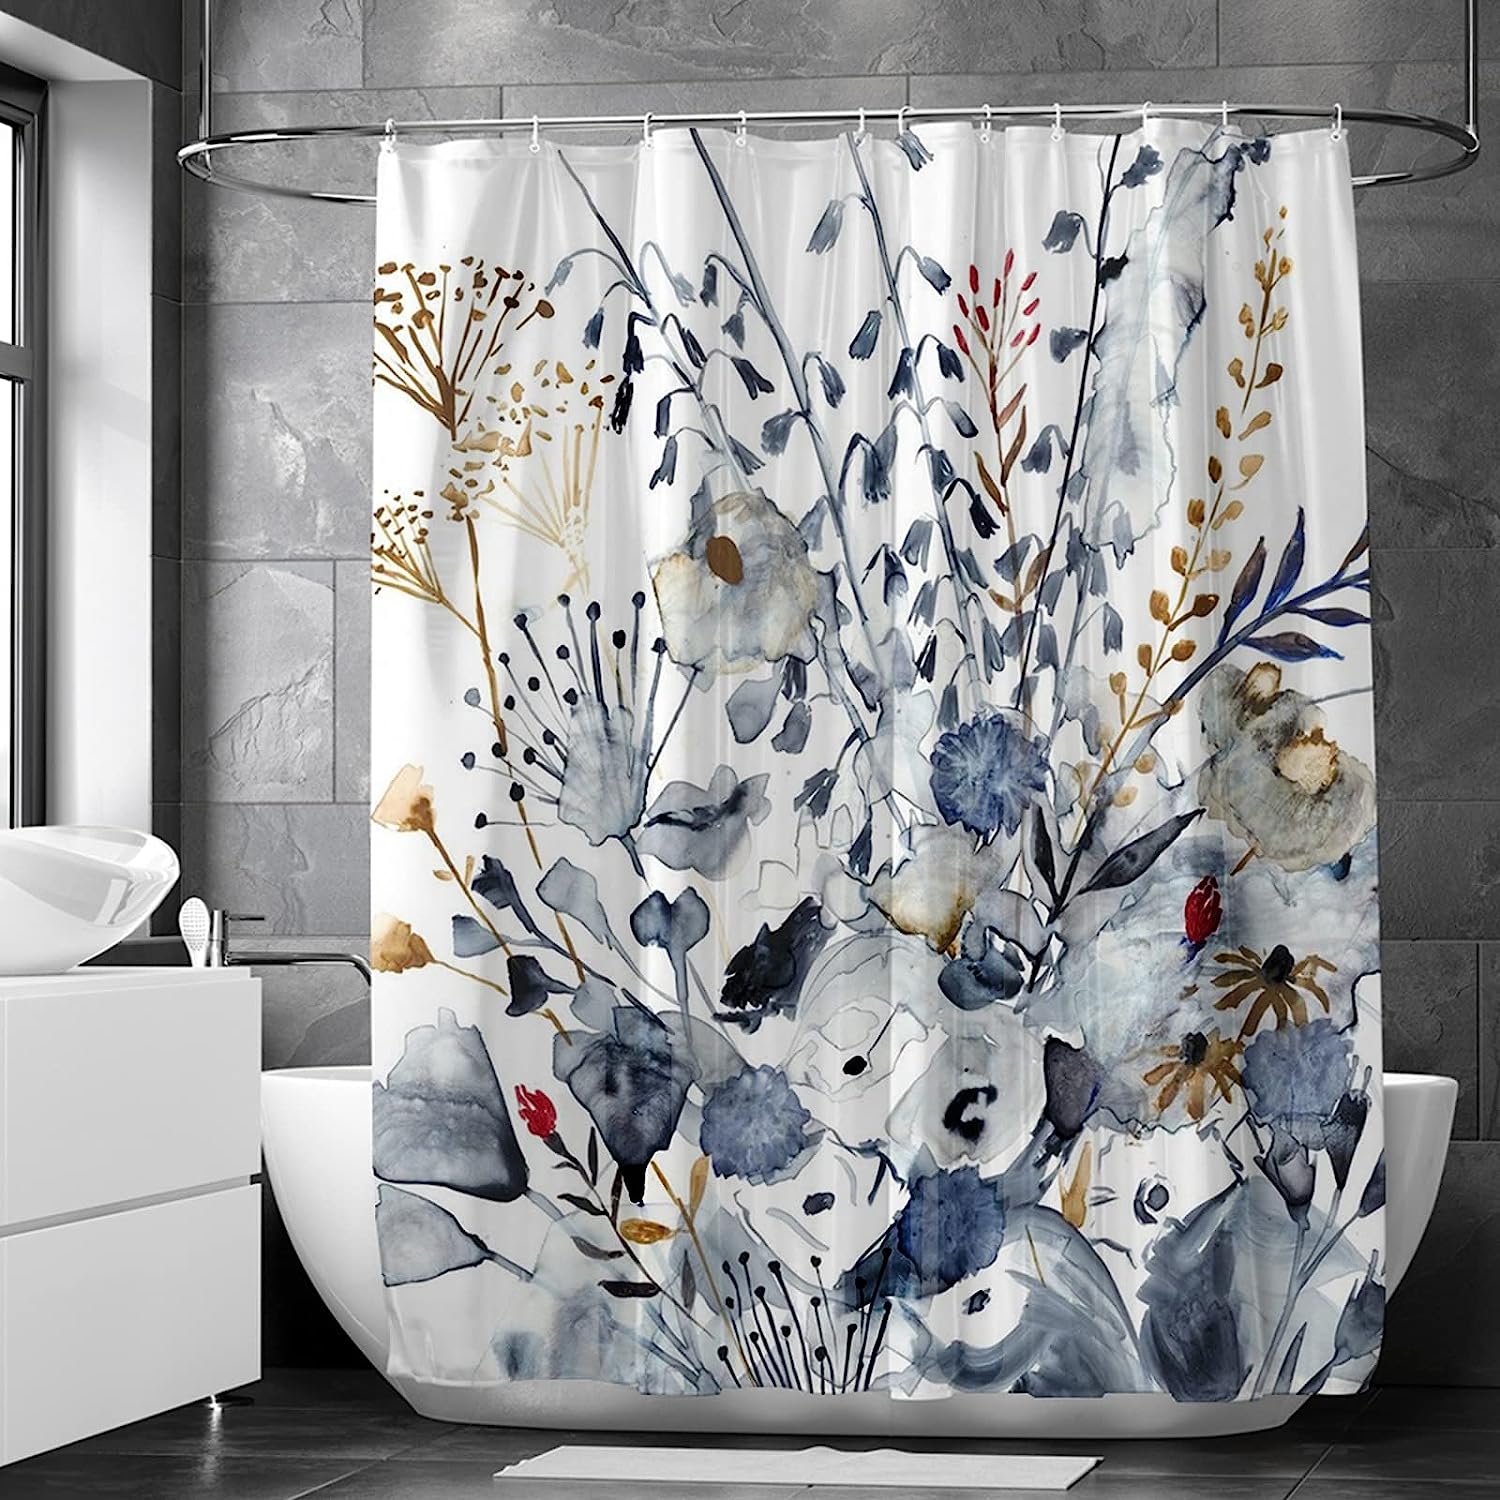 ZTTXL Floral Shower Curtain (72” x 72”), Polyester [...]